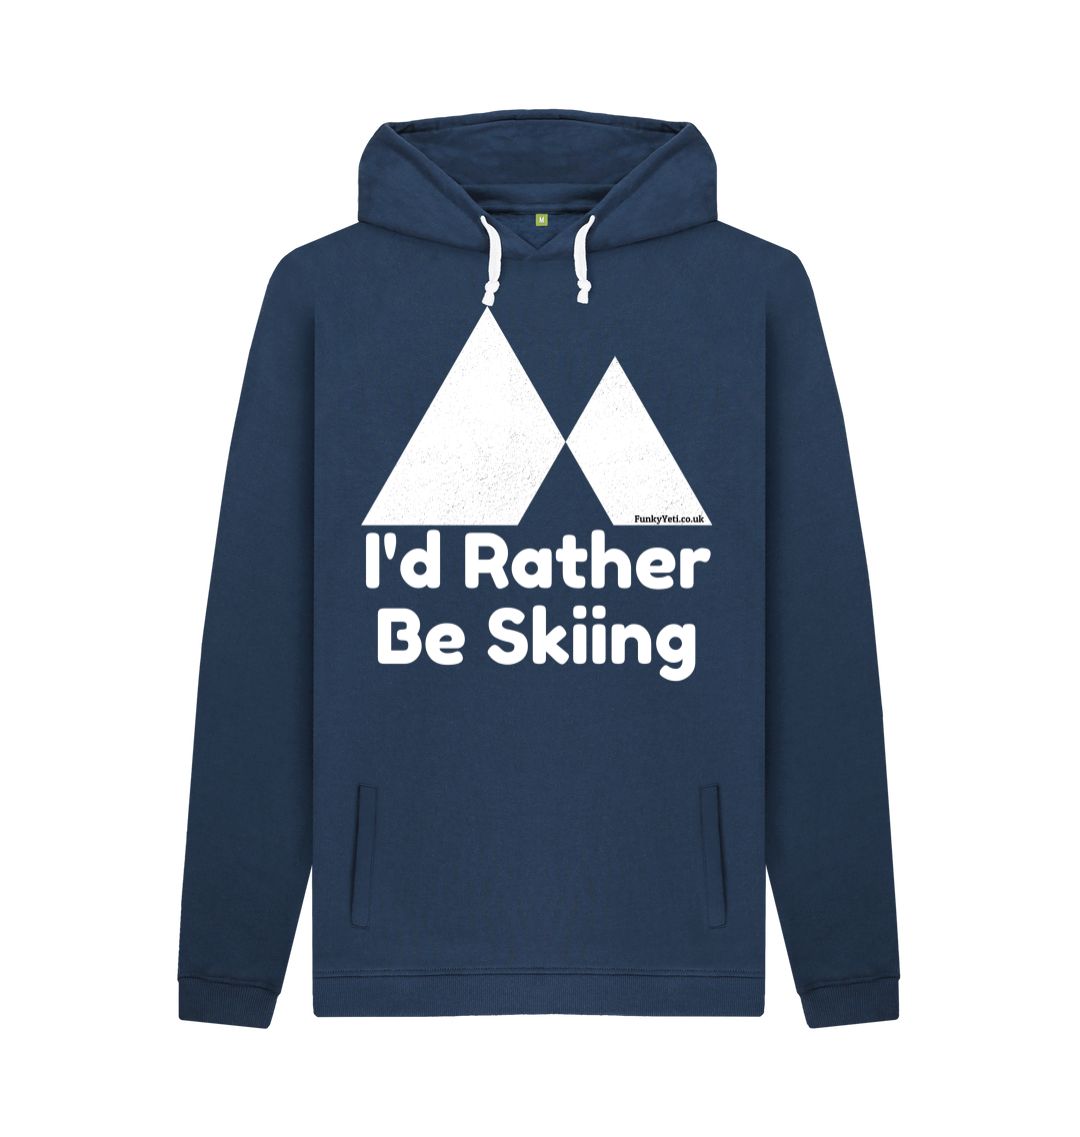 Navy Funky Yeti Men's Pullover Hoodie - I'd Rather Be Skiing